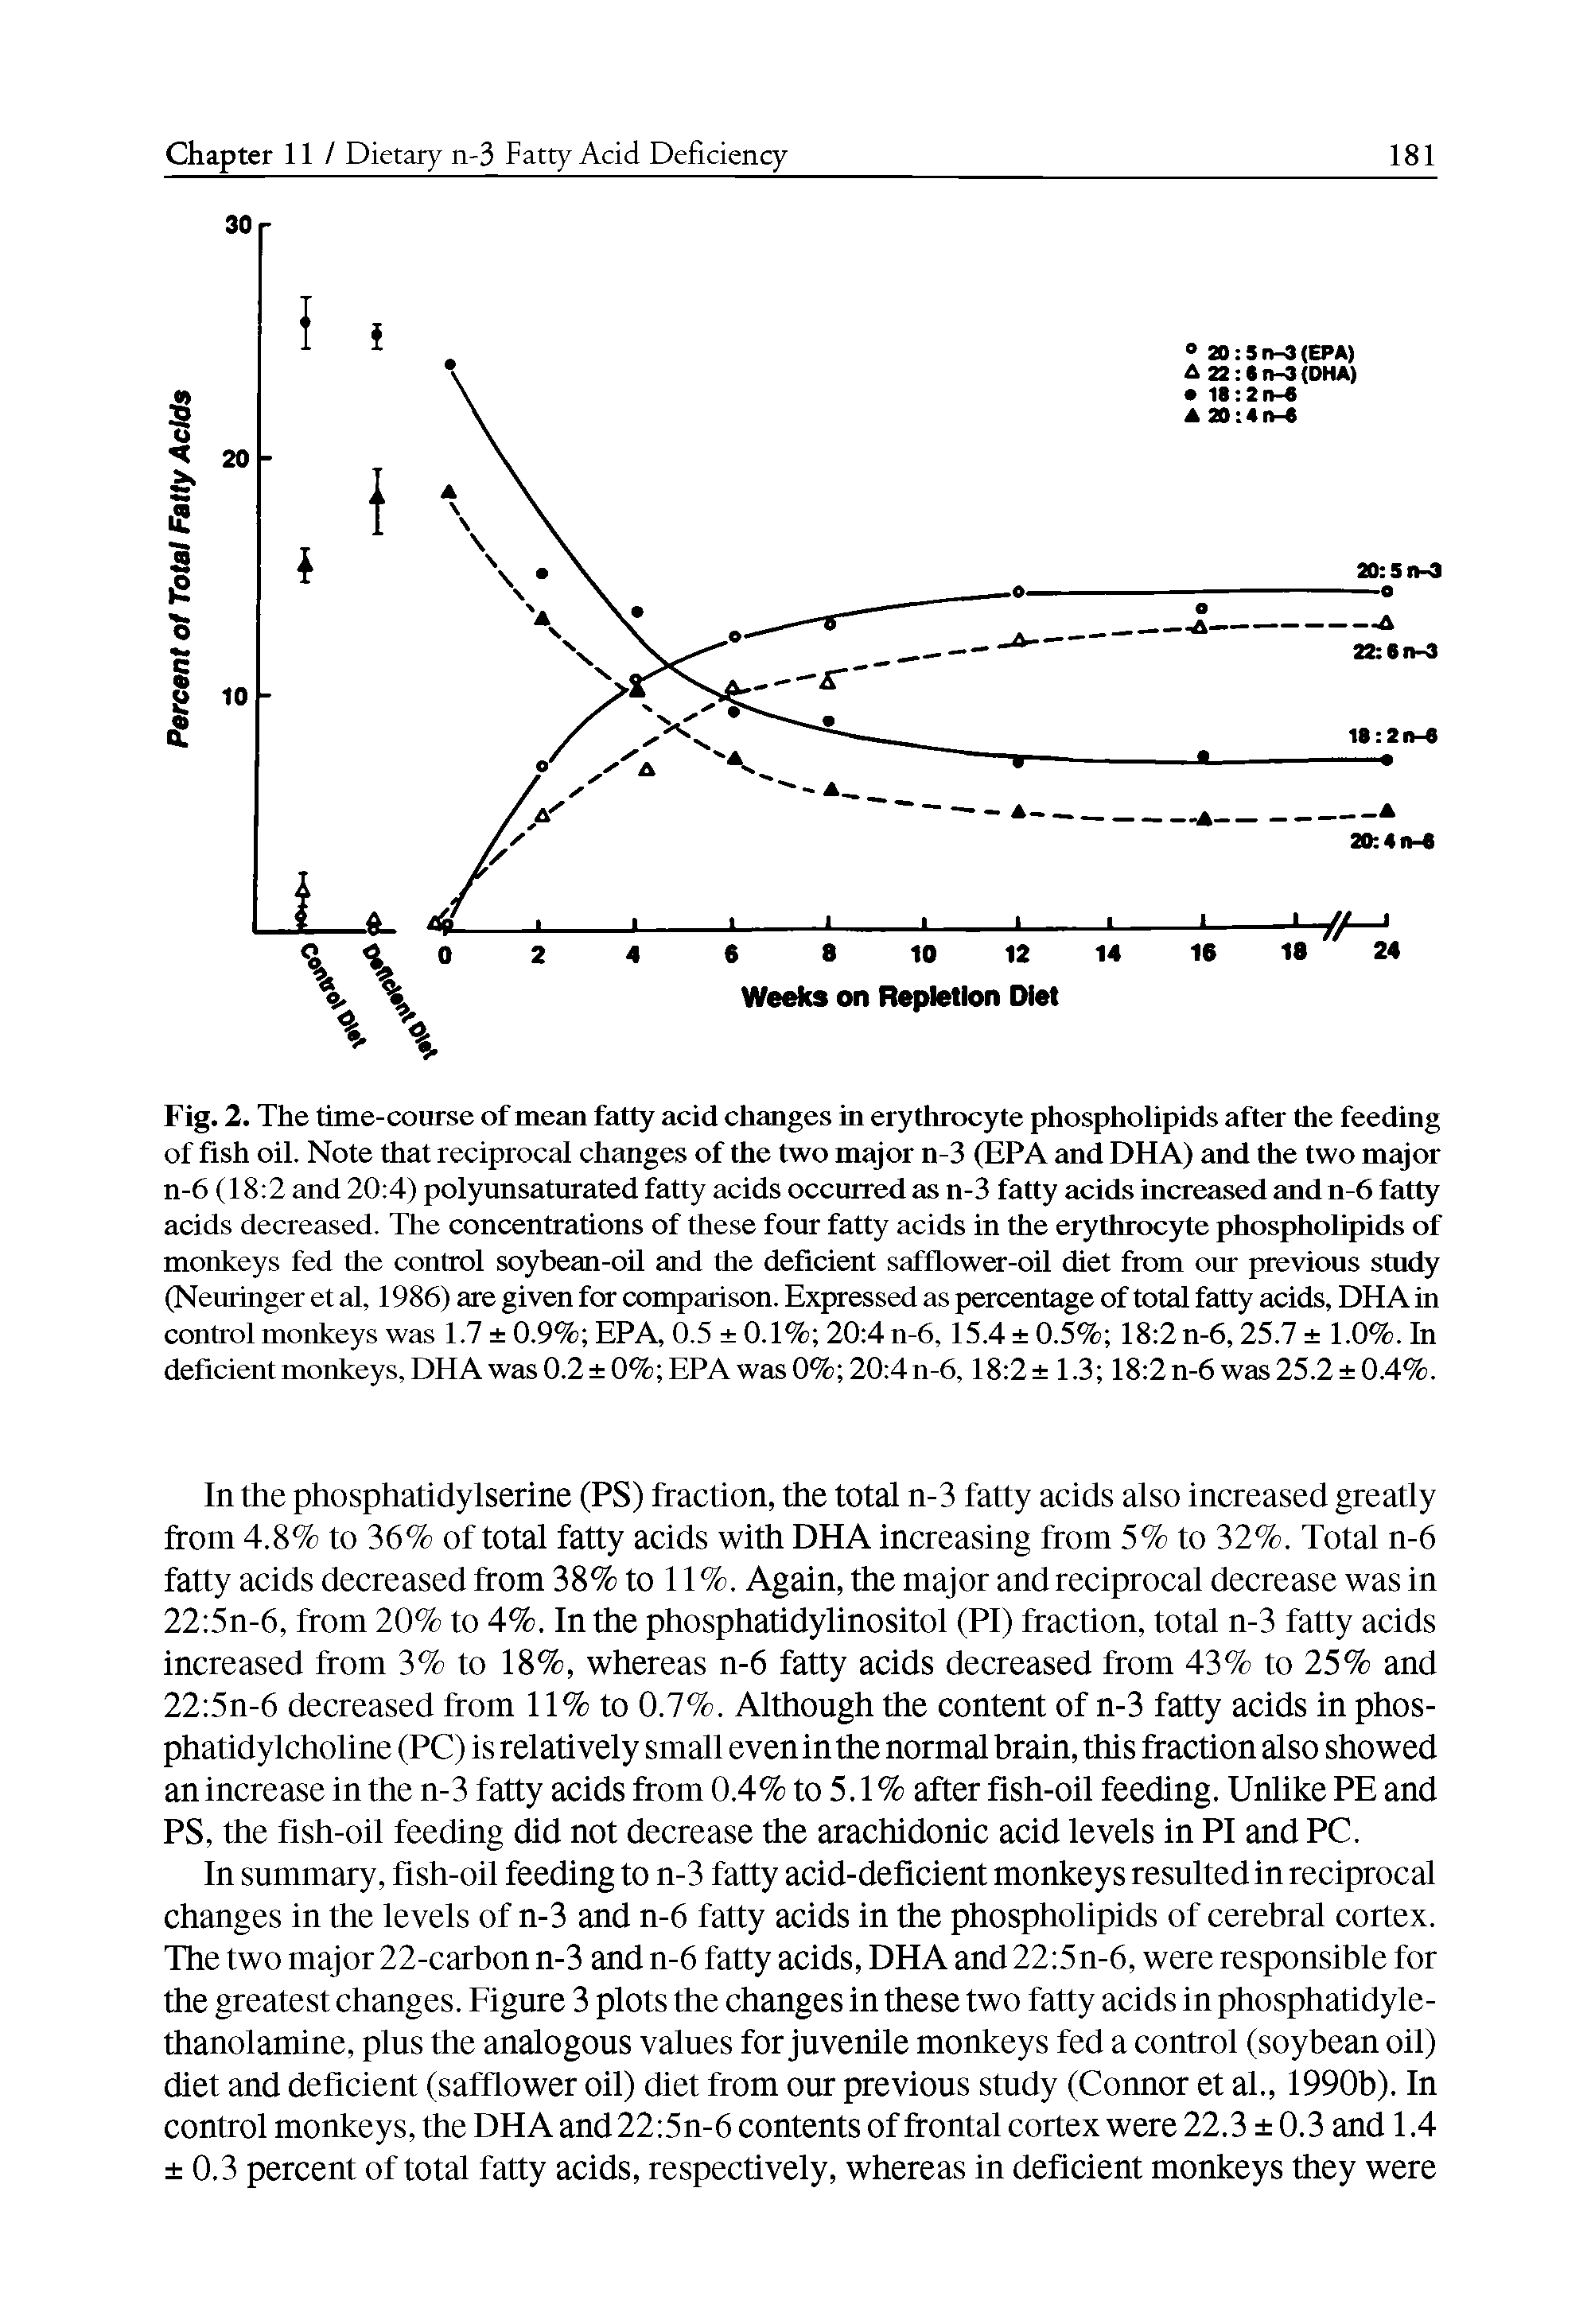 Fig. 2. The time-course of mean fatty acid changes in erythrocyte phospholipids after tire feeding of fish oil. Note that reciprocal changes of the two major n-3 (EPA and DHA) and the two major n-6 (18 2 and 20 4) polyunsaturated fatty acids occuned as n-3 fatty acids increased and n-6 fatty acids decreased. The concentrations of these four fatty acids in the erythrocyte phospholipids of monkeys fed the control soybean-oil and the deficient safflower-oil diet from our previous study (Neuringer et al, 1986) are given for comparison. Expressed as percentage of total fatty acids, DHA in control monkeys was 1.7 0.9% EPA, 0.5 0.1% 20 4 n-6,15.4 0.5% 18 2 n-6,25.7 1.0%. In deficient monkeys,DHA was0.2 0% EPA was 0% 20 4n-6,18 2 1.3 18 2 n-6 was 25.2 0.4%.